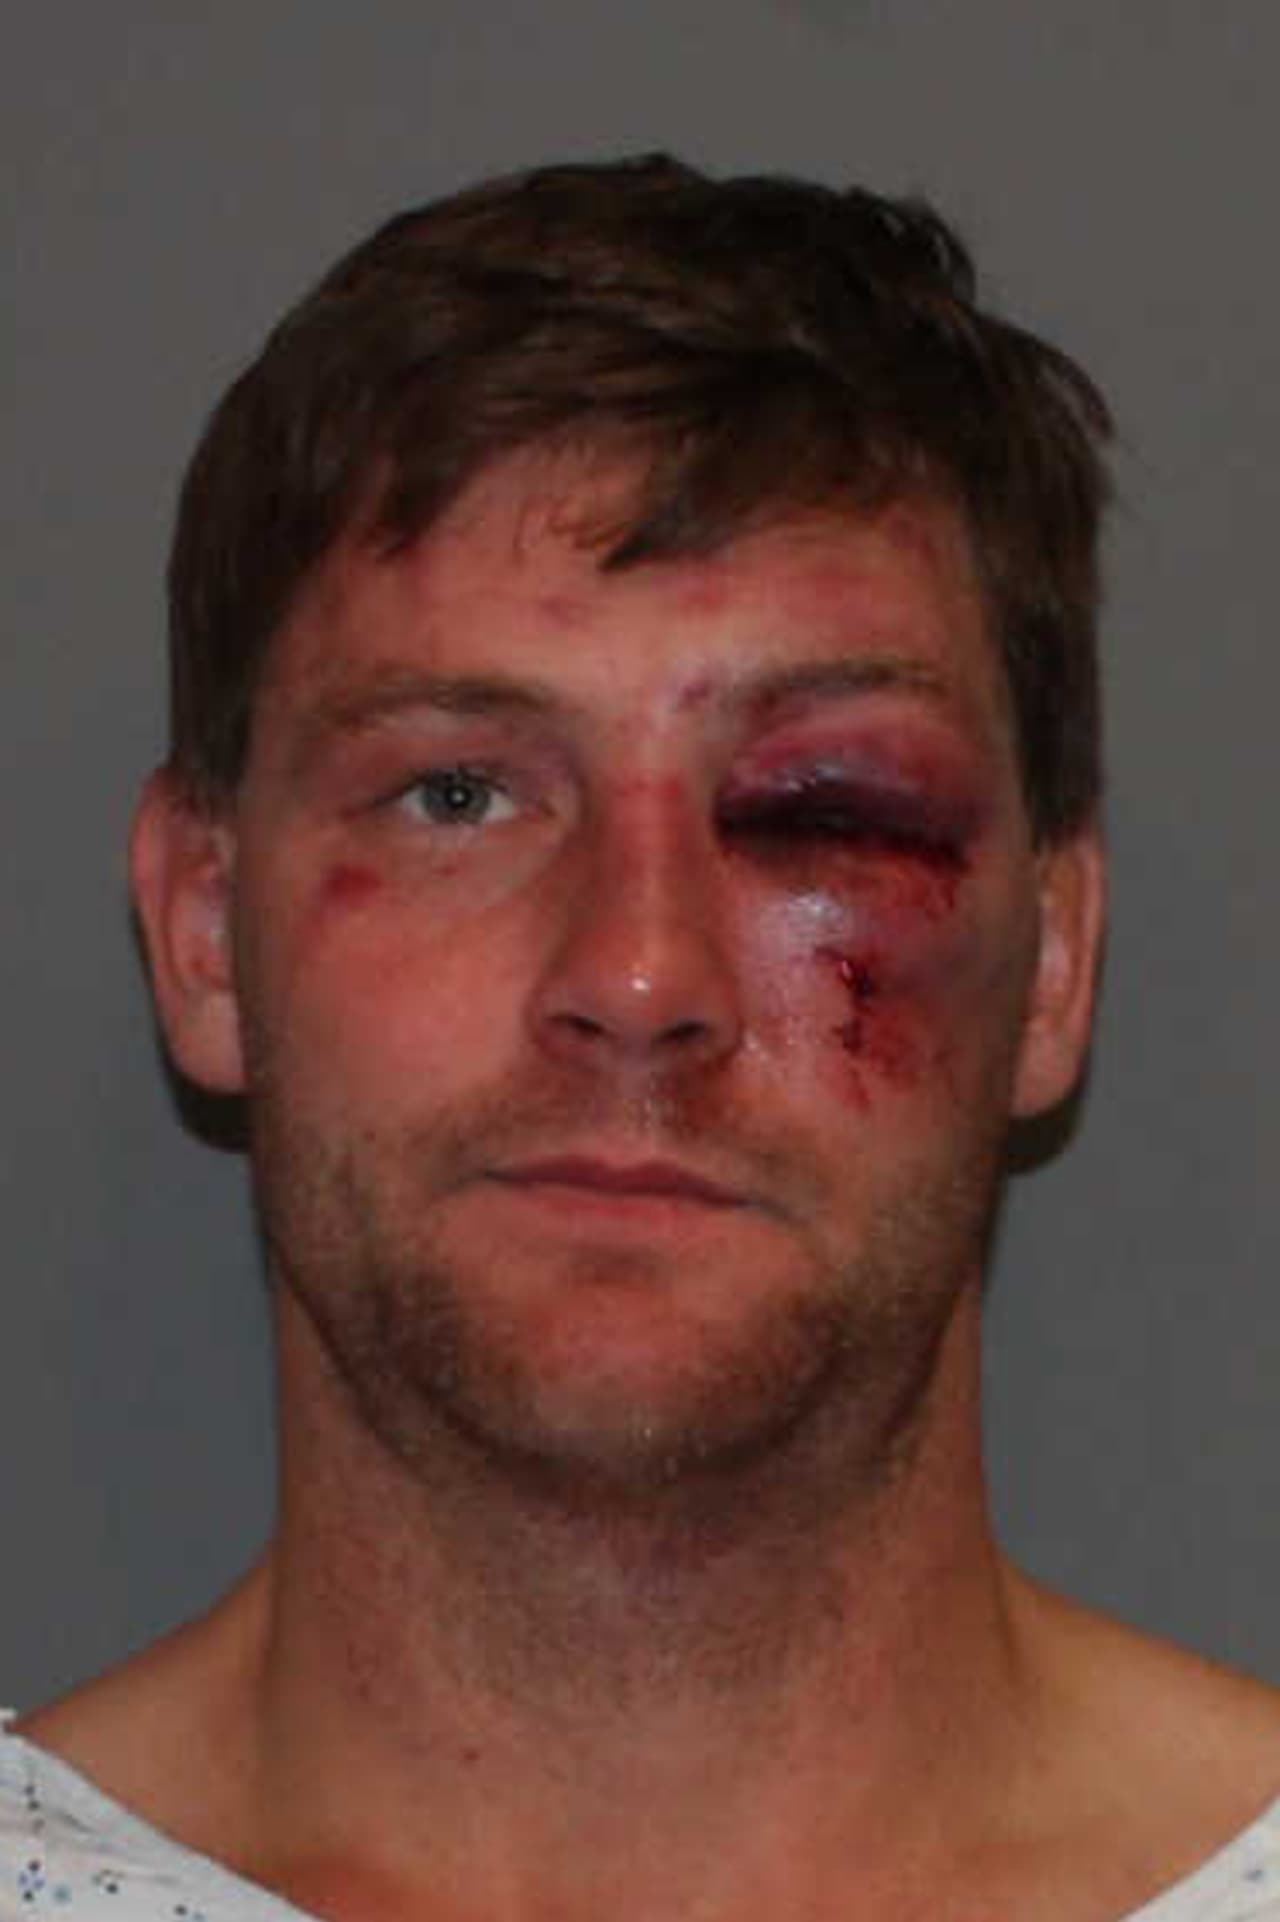 Christian Garnett, 32, was charged with assault on a police officer and driving under the influence Thursday morning by Norwalk Police.